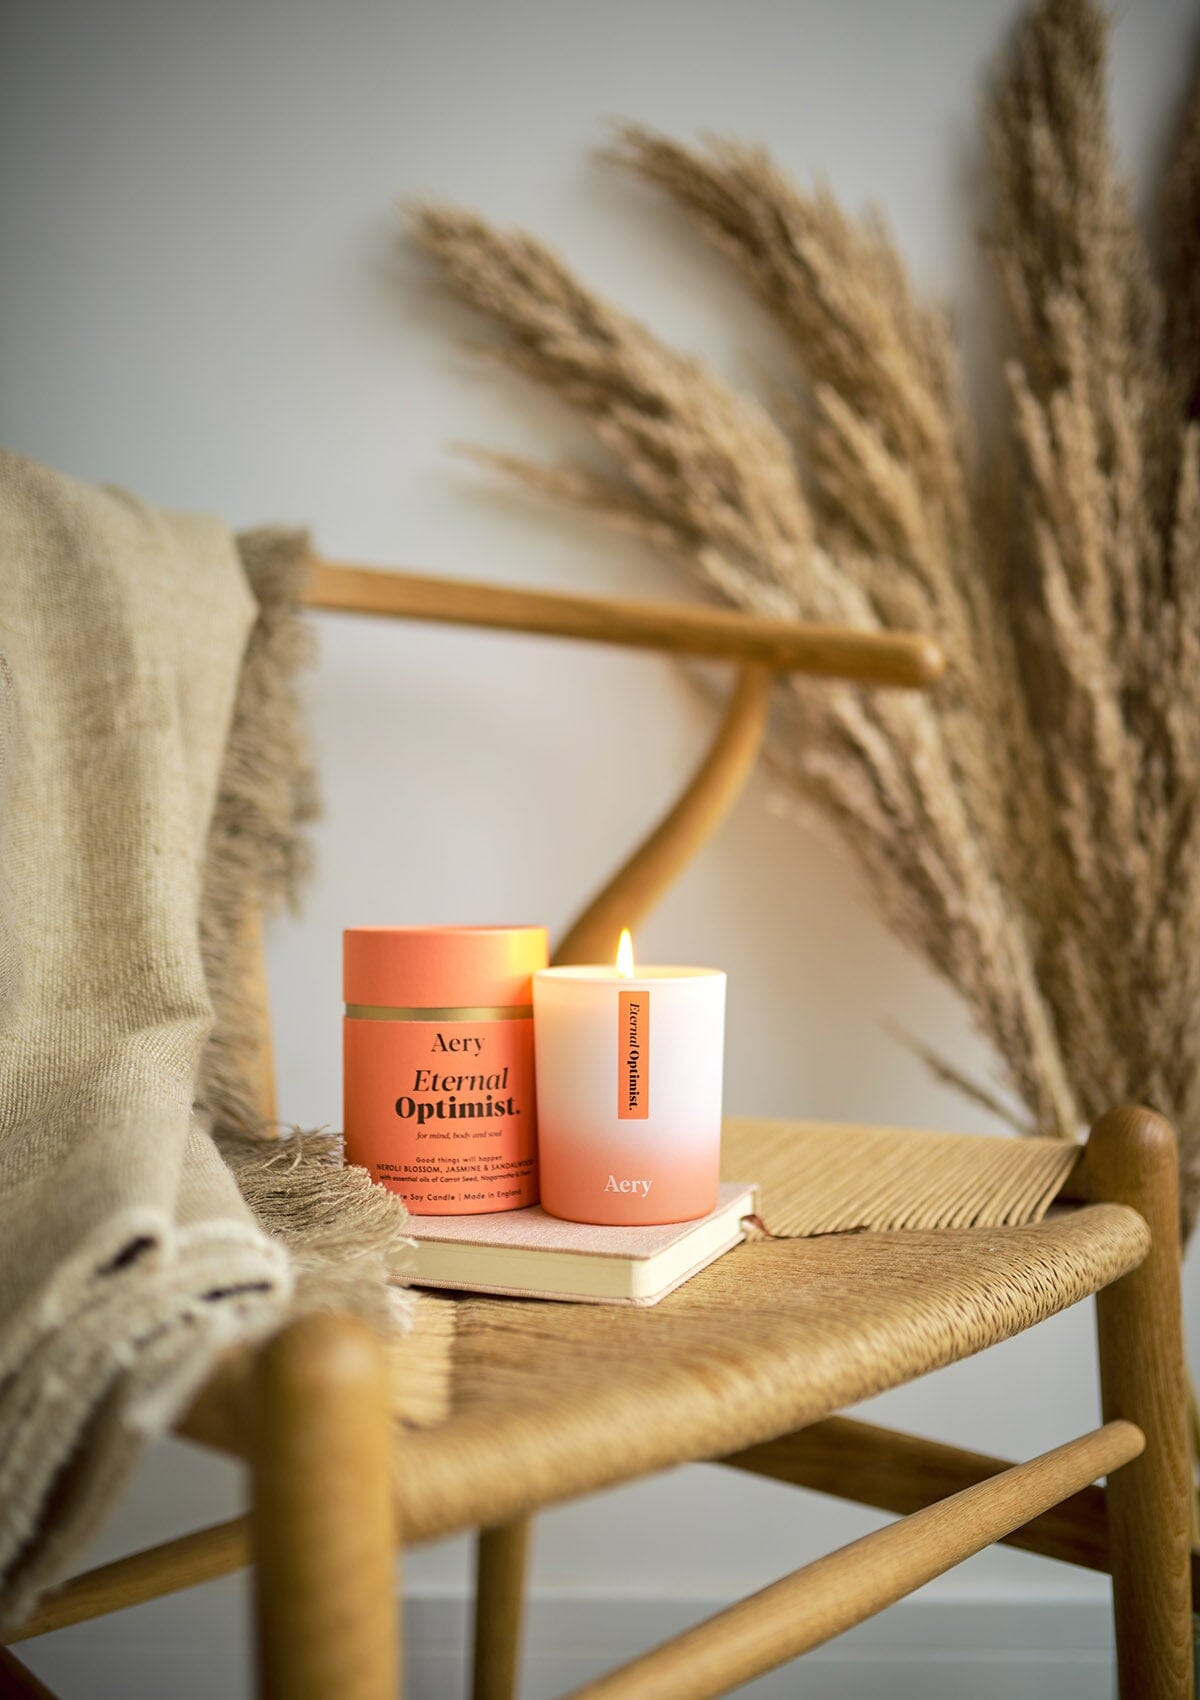 Orange Eternal Optimist candle displayed next to product packaging by Aery placed on wicker chair 